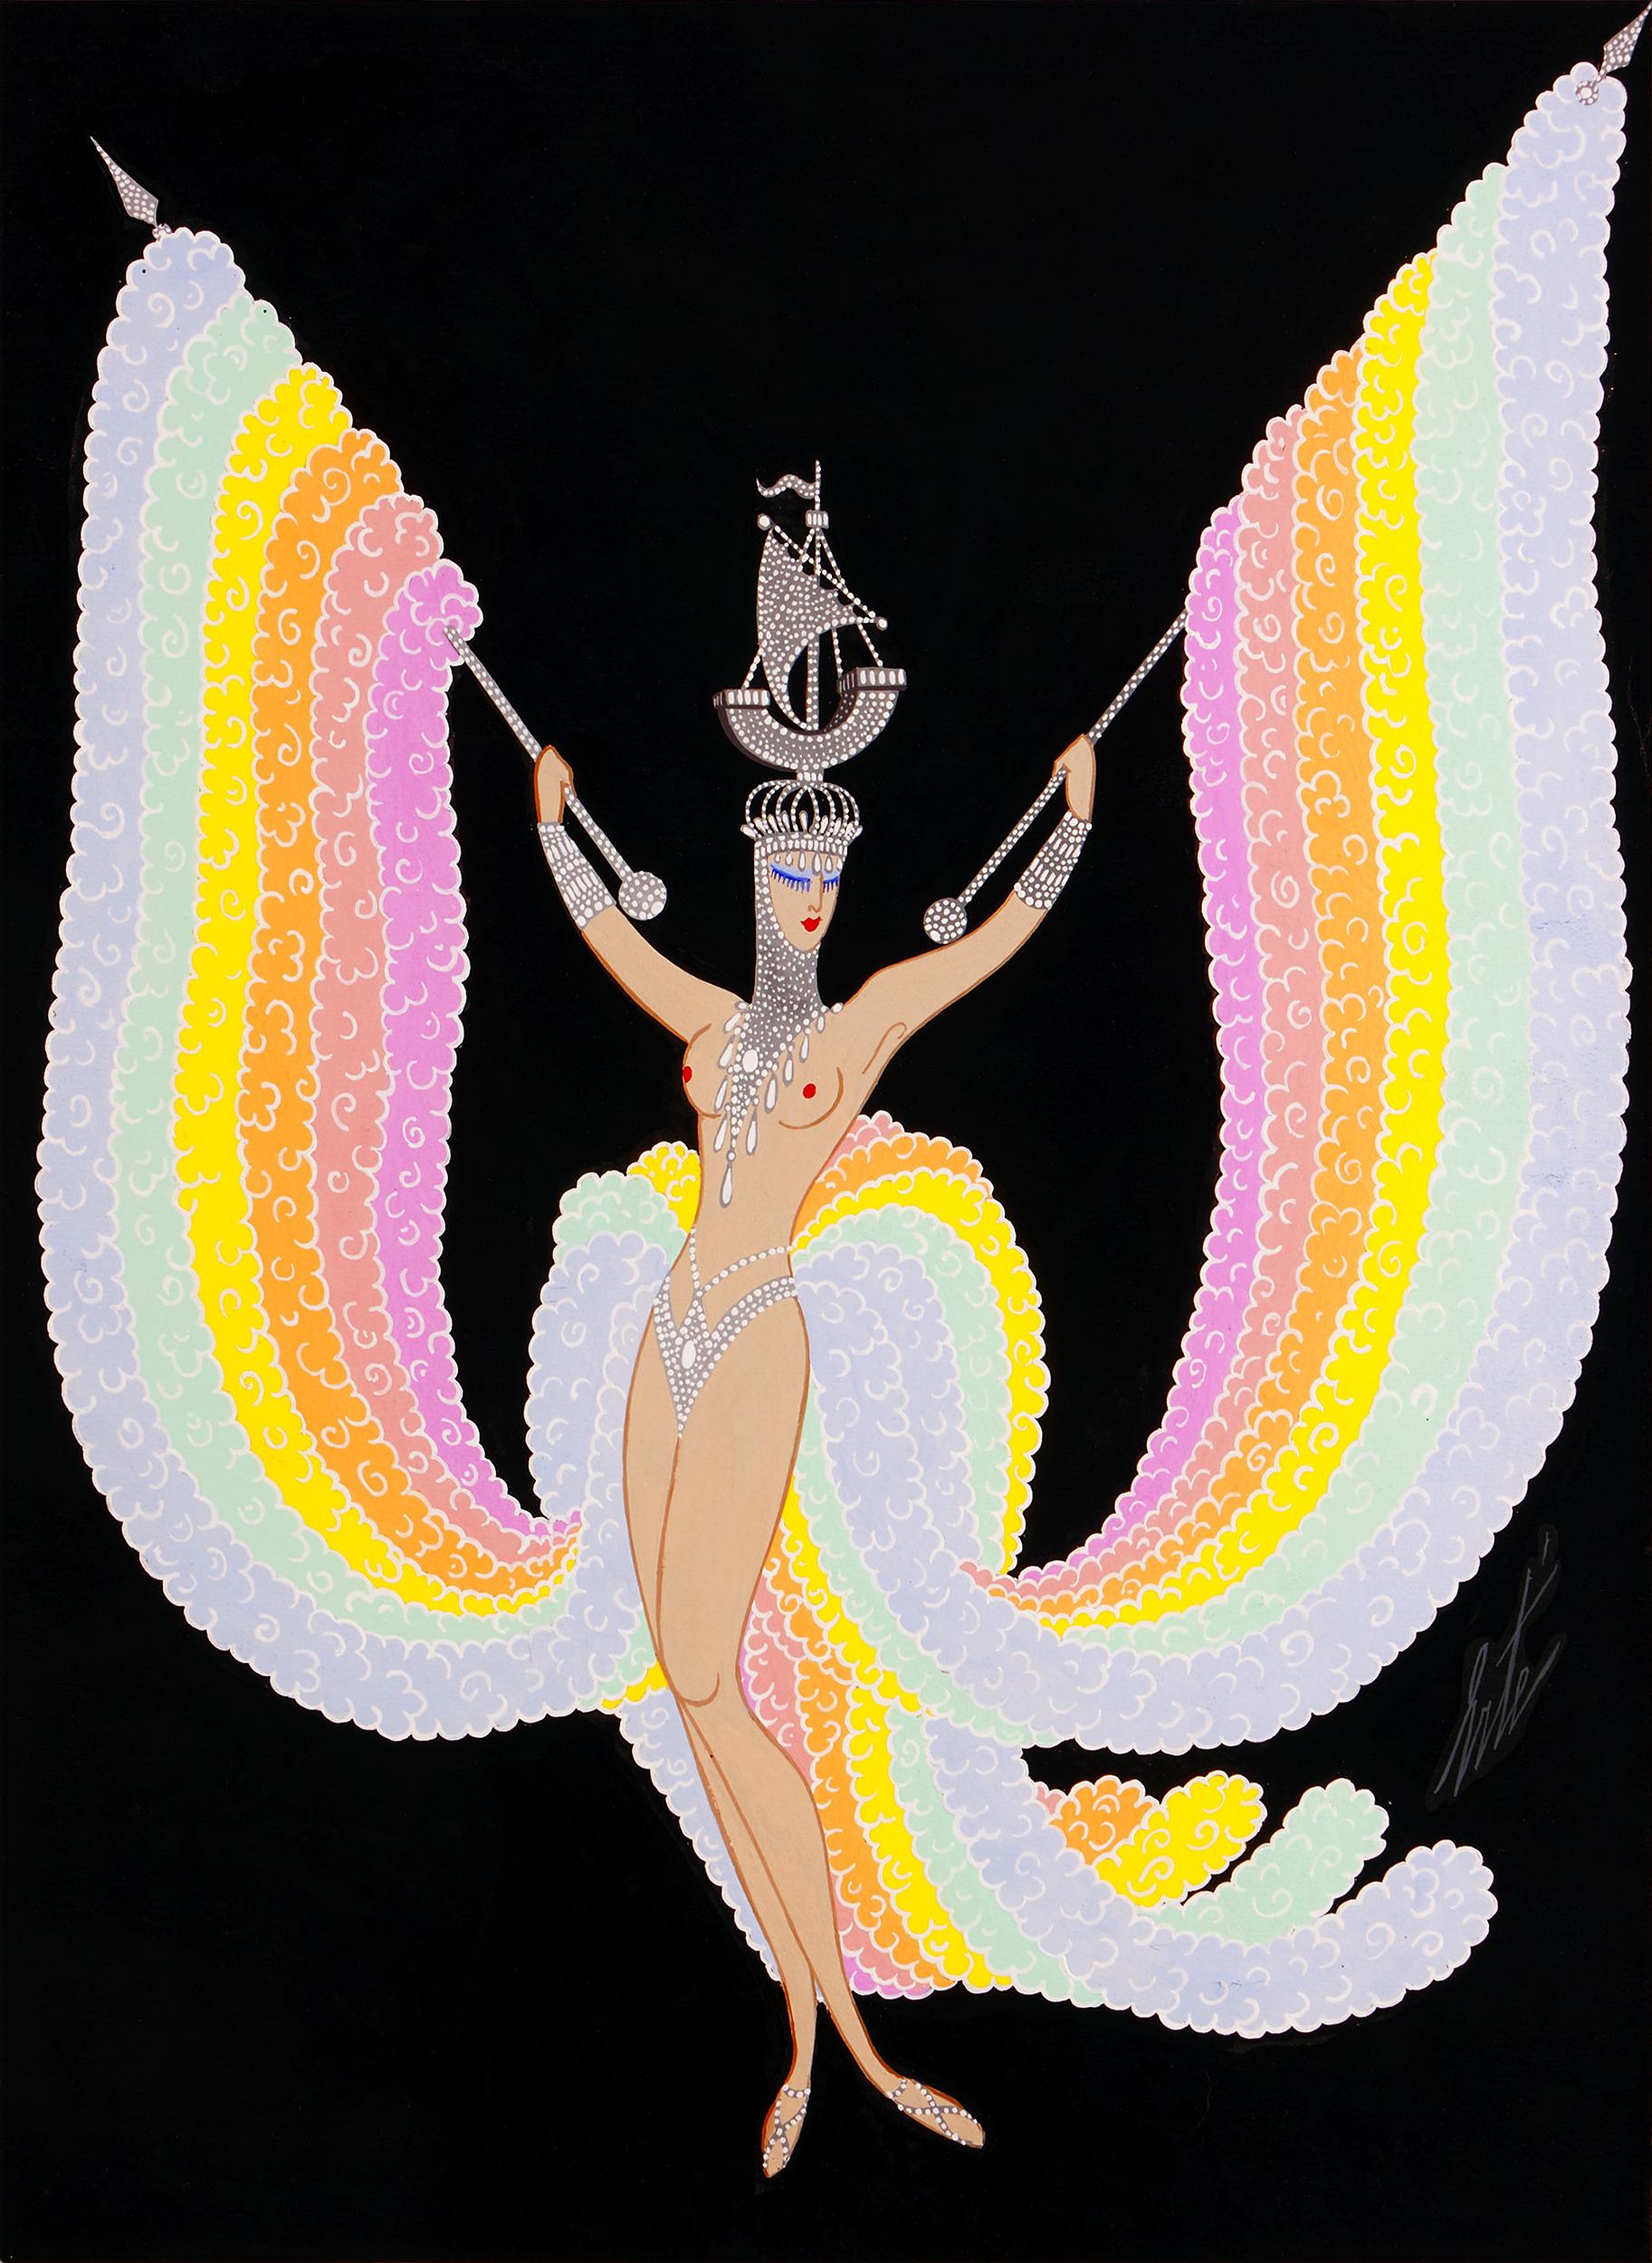 Erté (Romain de Tirtoff)
1892-1990 | Russian-French

Les filles final
(The Final Girls)

Signed “Erté” (lower right)
Inscribed No. 18.340 (en verso)
Gouache on paper

An elaborate design for a dazzling grand finale, this daring costume features a